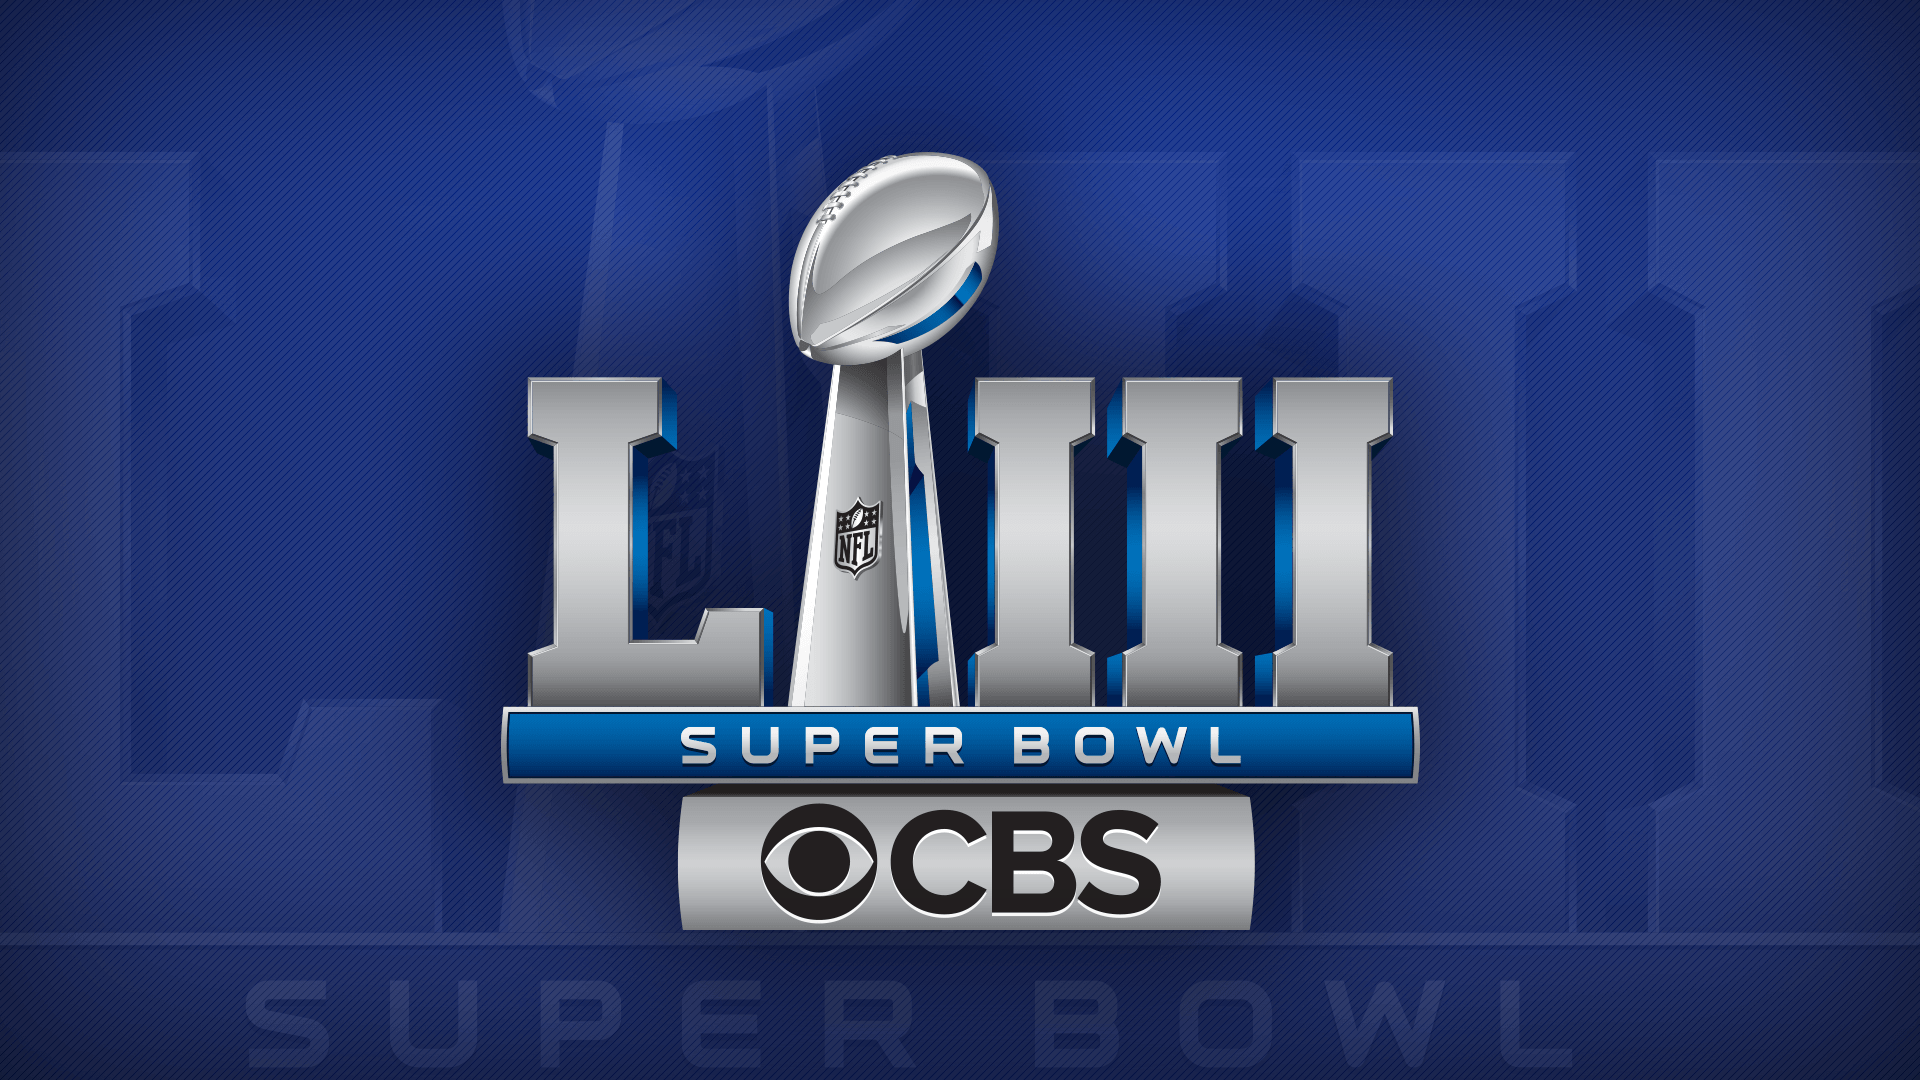 CBS' Super Bowl Sunday begins with seven hours of pregame coverage